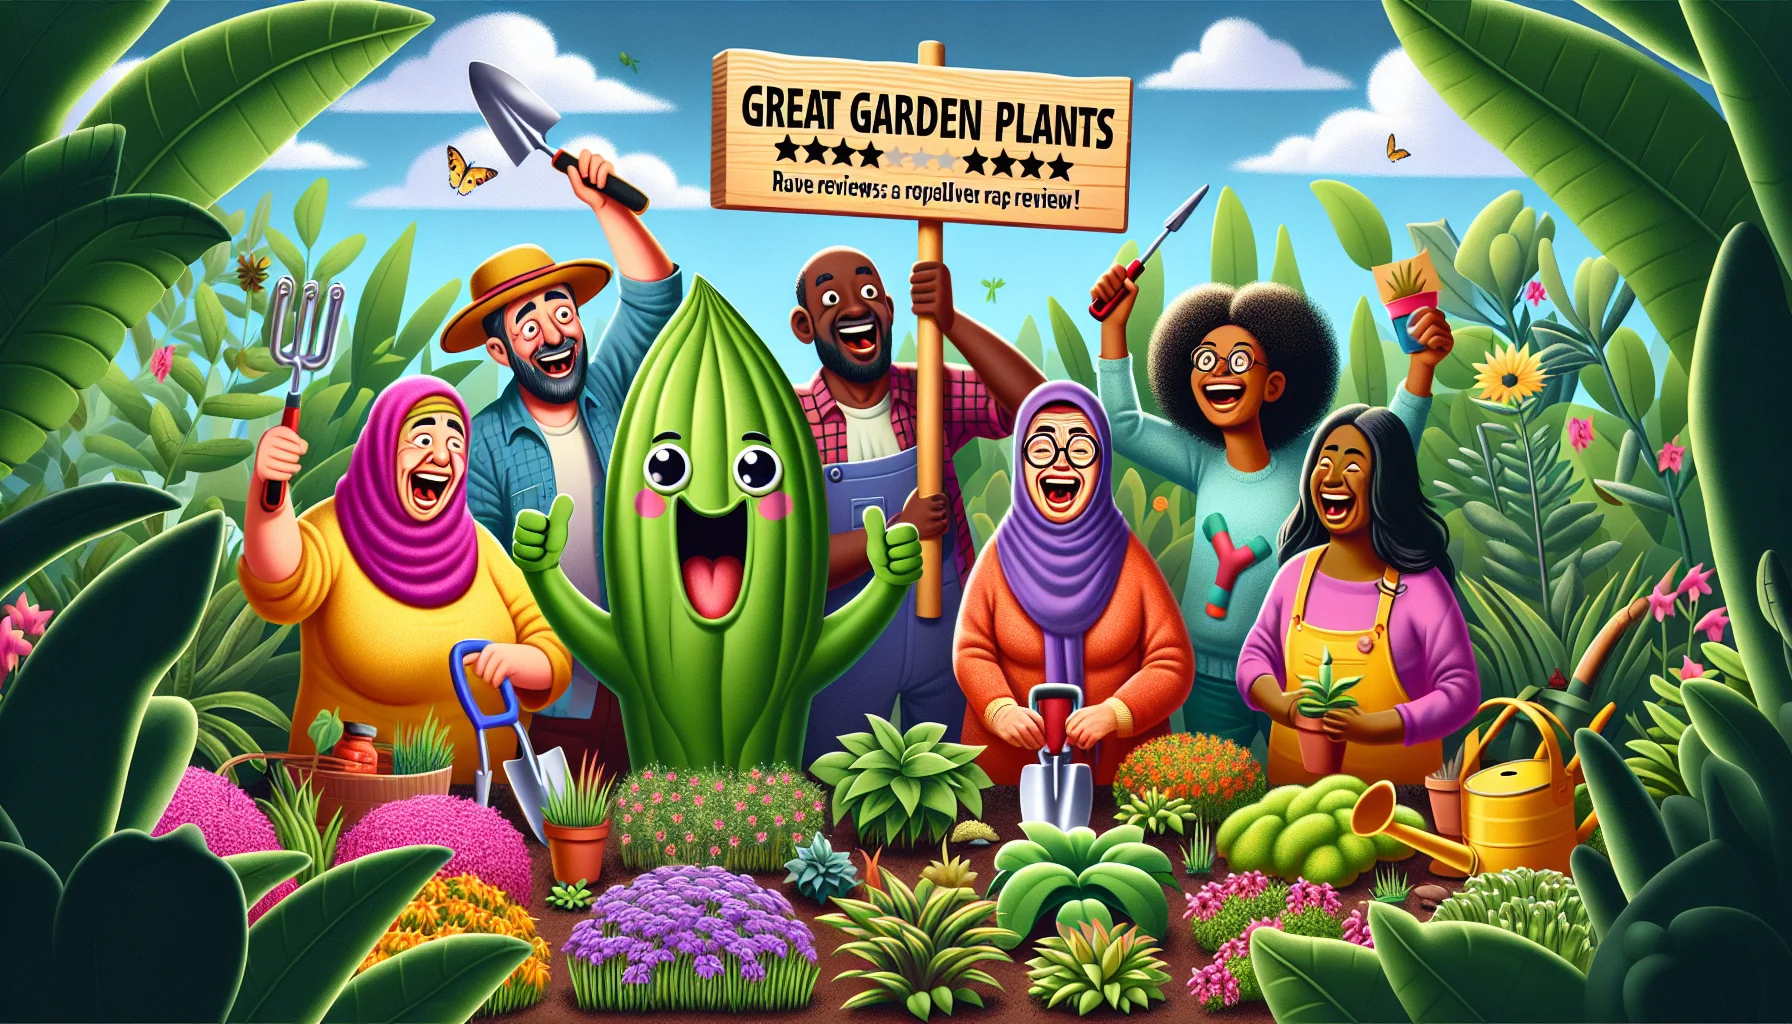 Create an engaging and humorous image that portrays gardening as a wonderful activity. In the center, depict a group of diverse people - a Middle-Eastern woman, a Hispanic man, a White man, a Black woman and a South Asian woman, all laughing and engaged in different gardening tasks among a myriad of vibrant plants. Beside them, an oversized plant with a comical face can be seen holding a sign that says 'Great Garden Plants Reviews' with rave reviews inscribed on it. The background should feature lush greenery and a blue sky that augments the beauty of the scene.